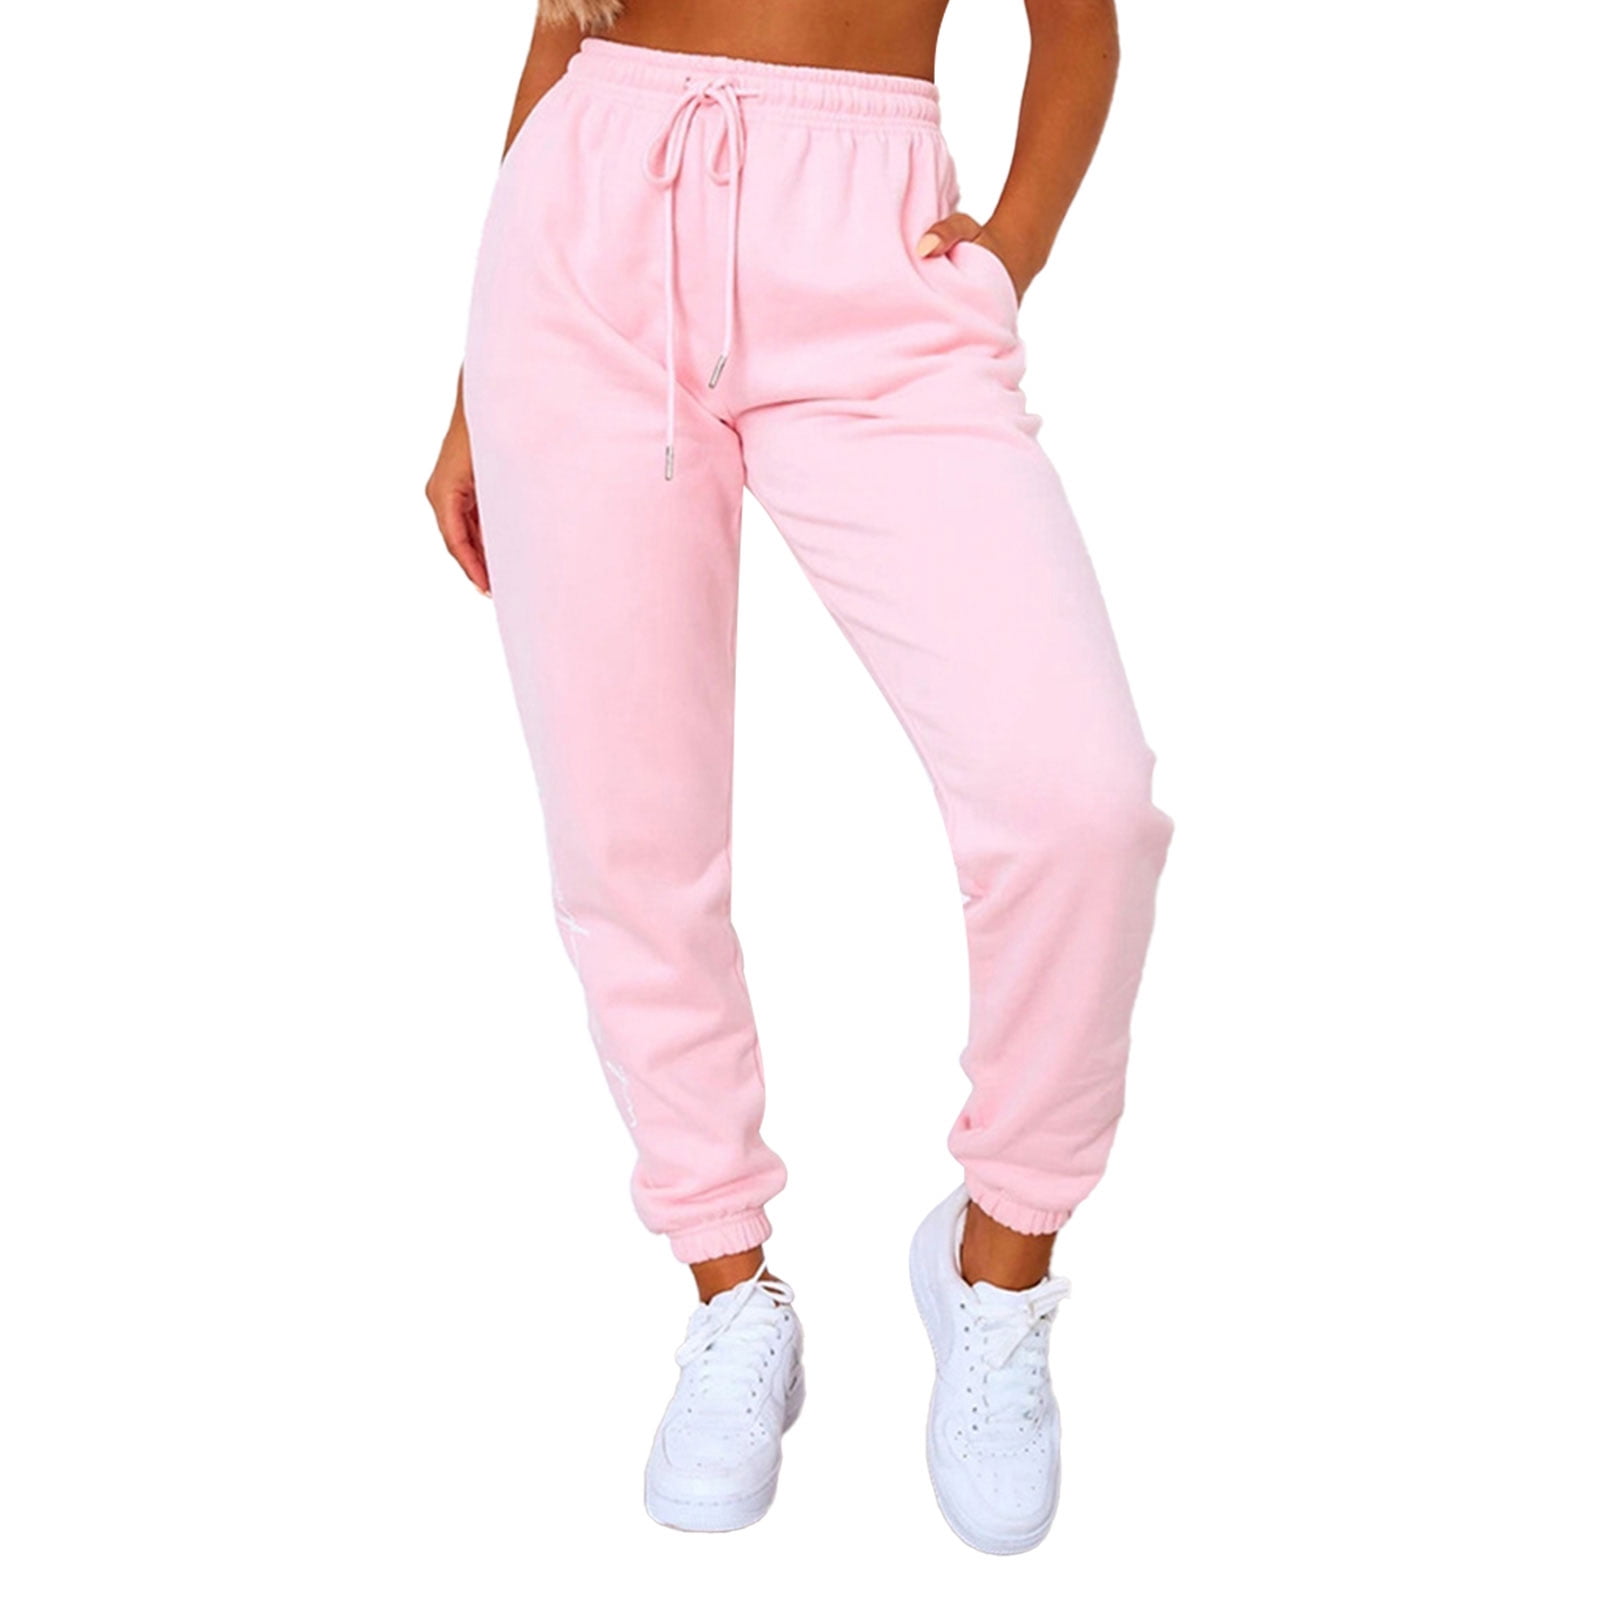 Diconna women's loose track pants high waist solid color training ...